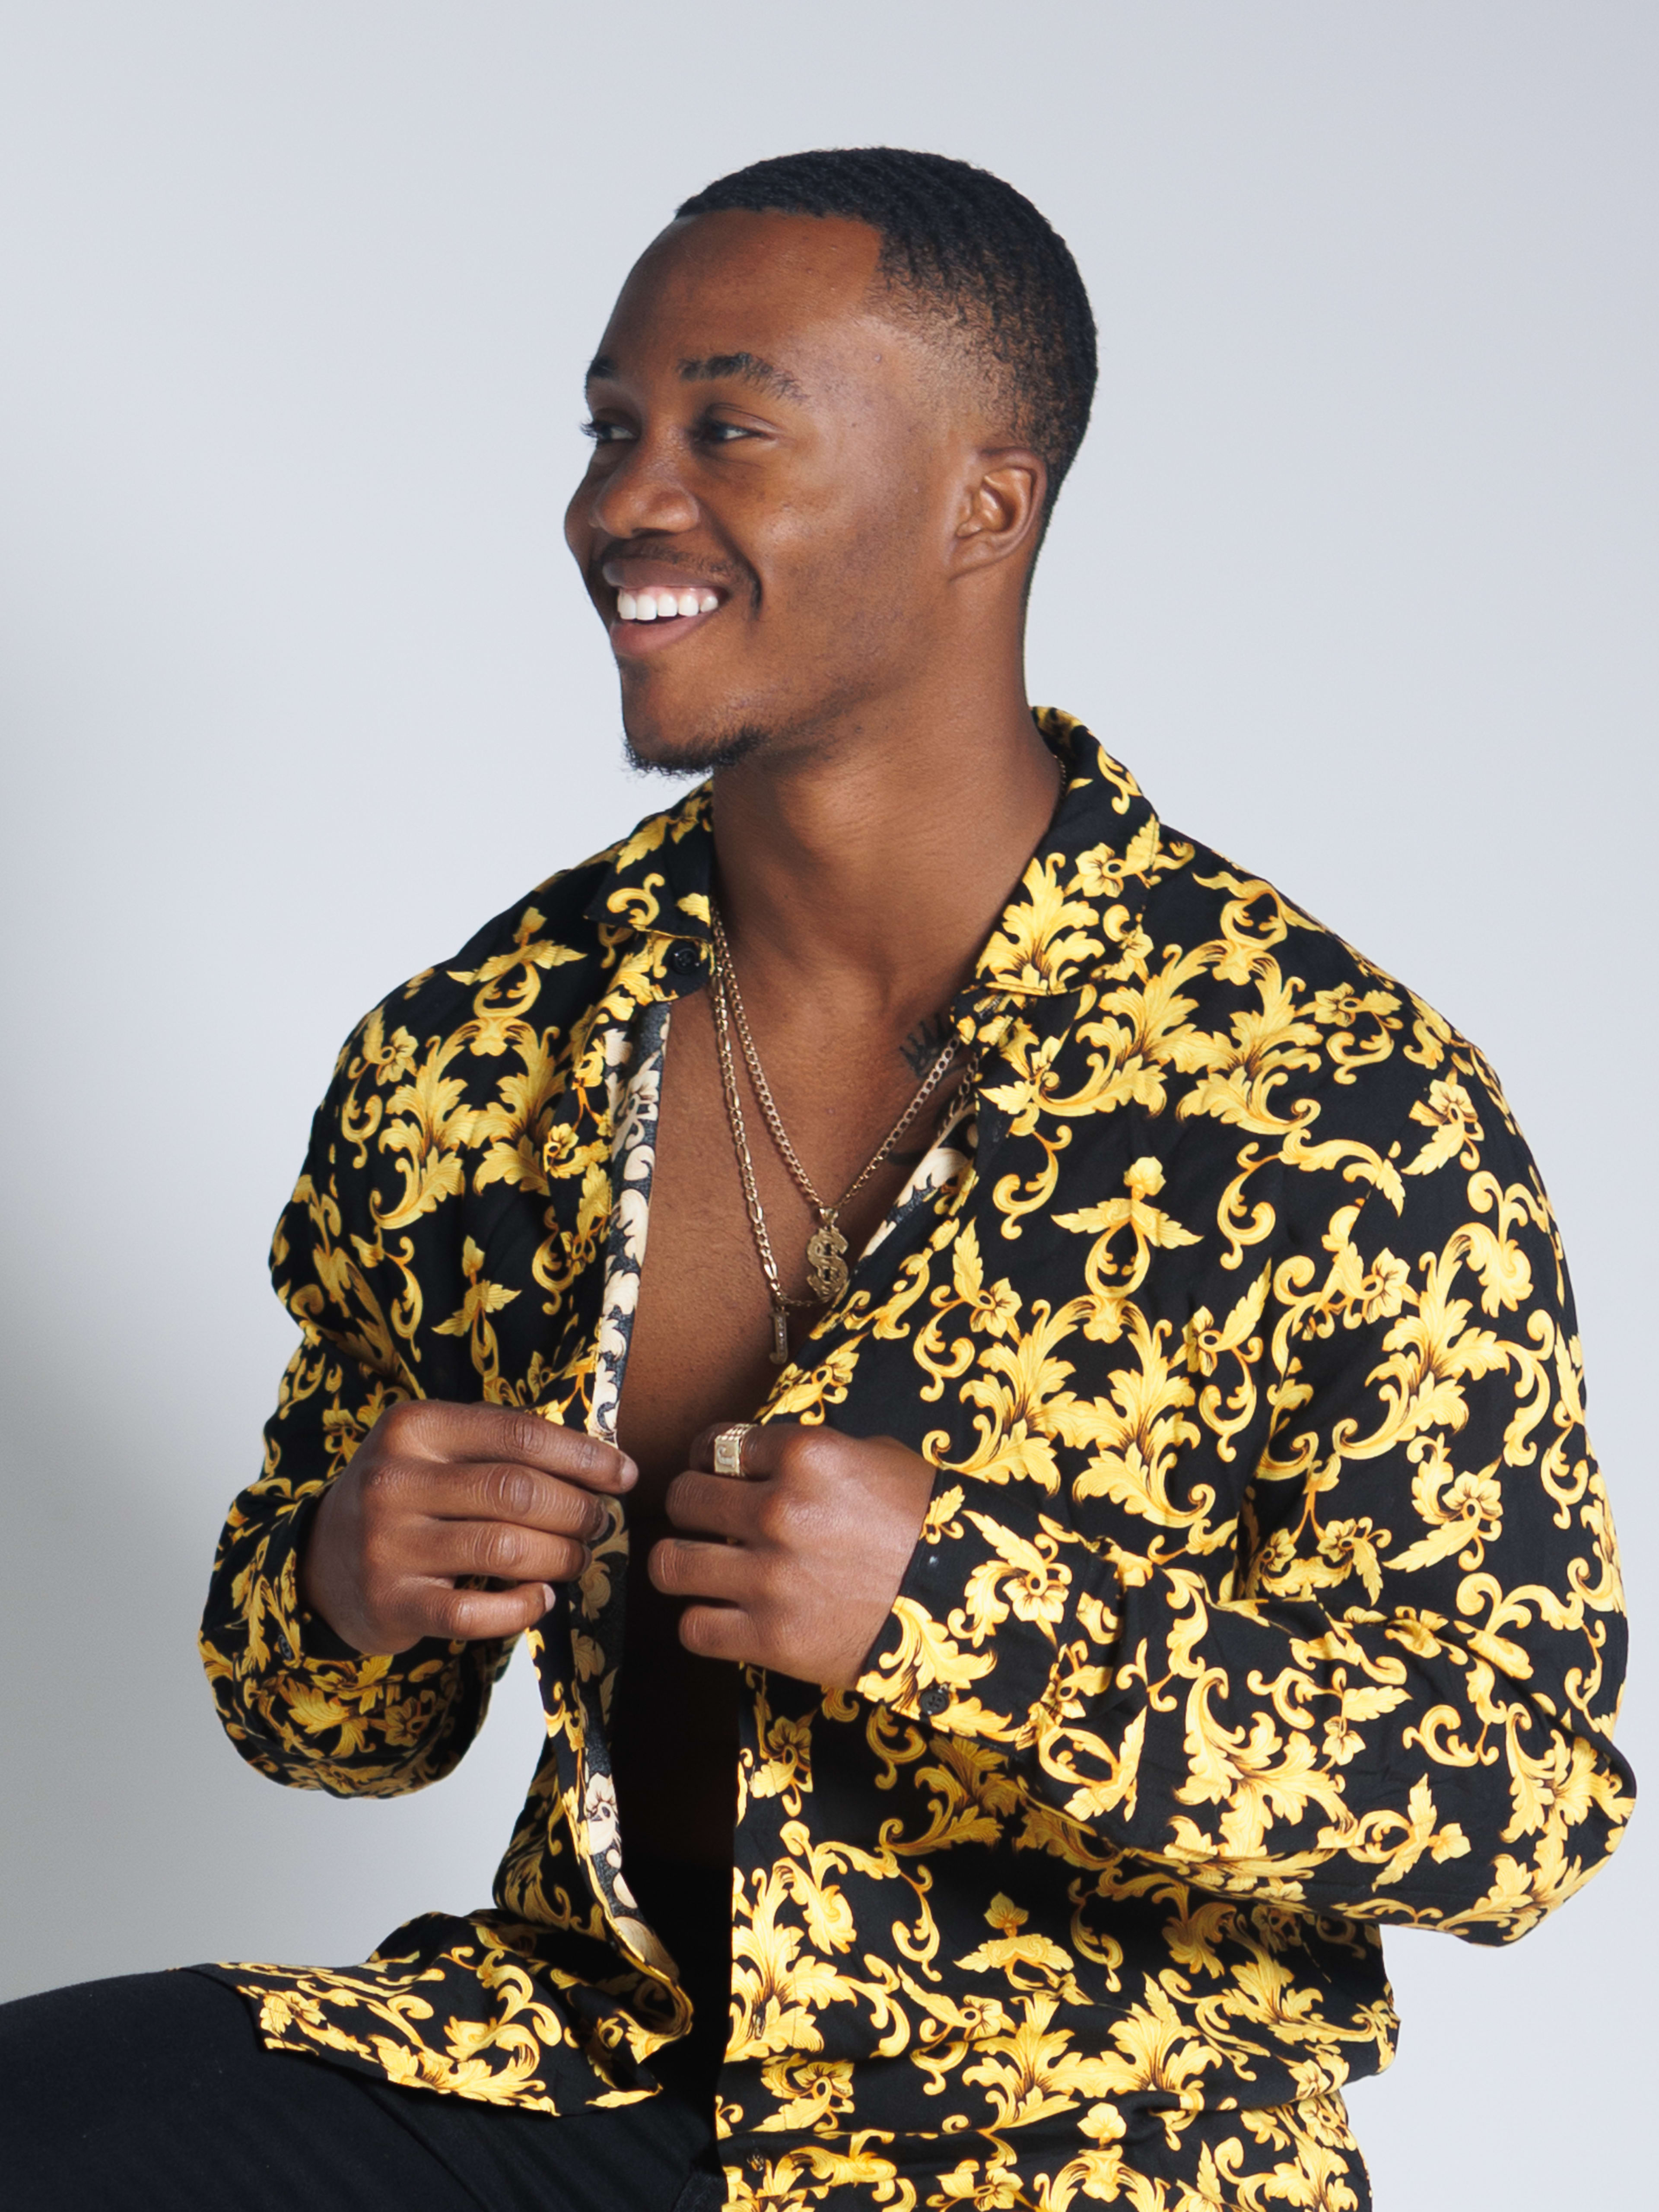 A man posing in yellow and black during a fashion photo shoot.